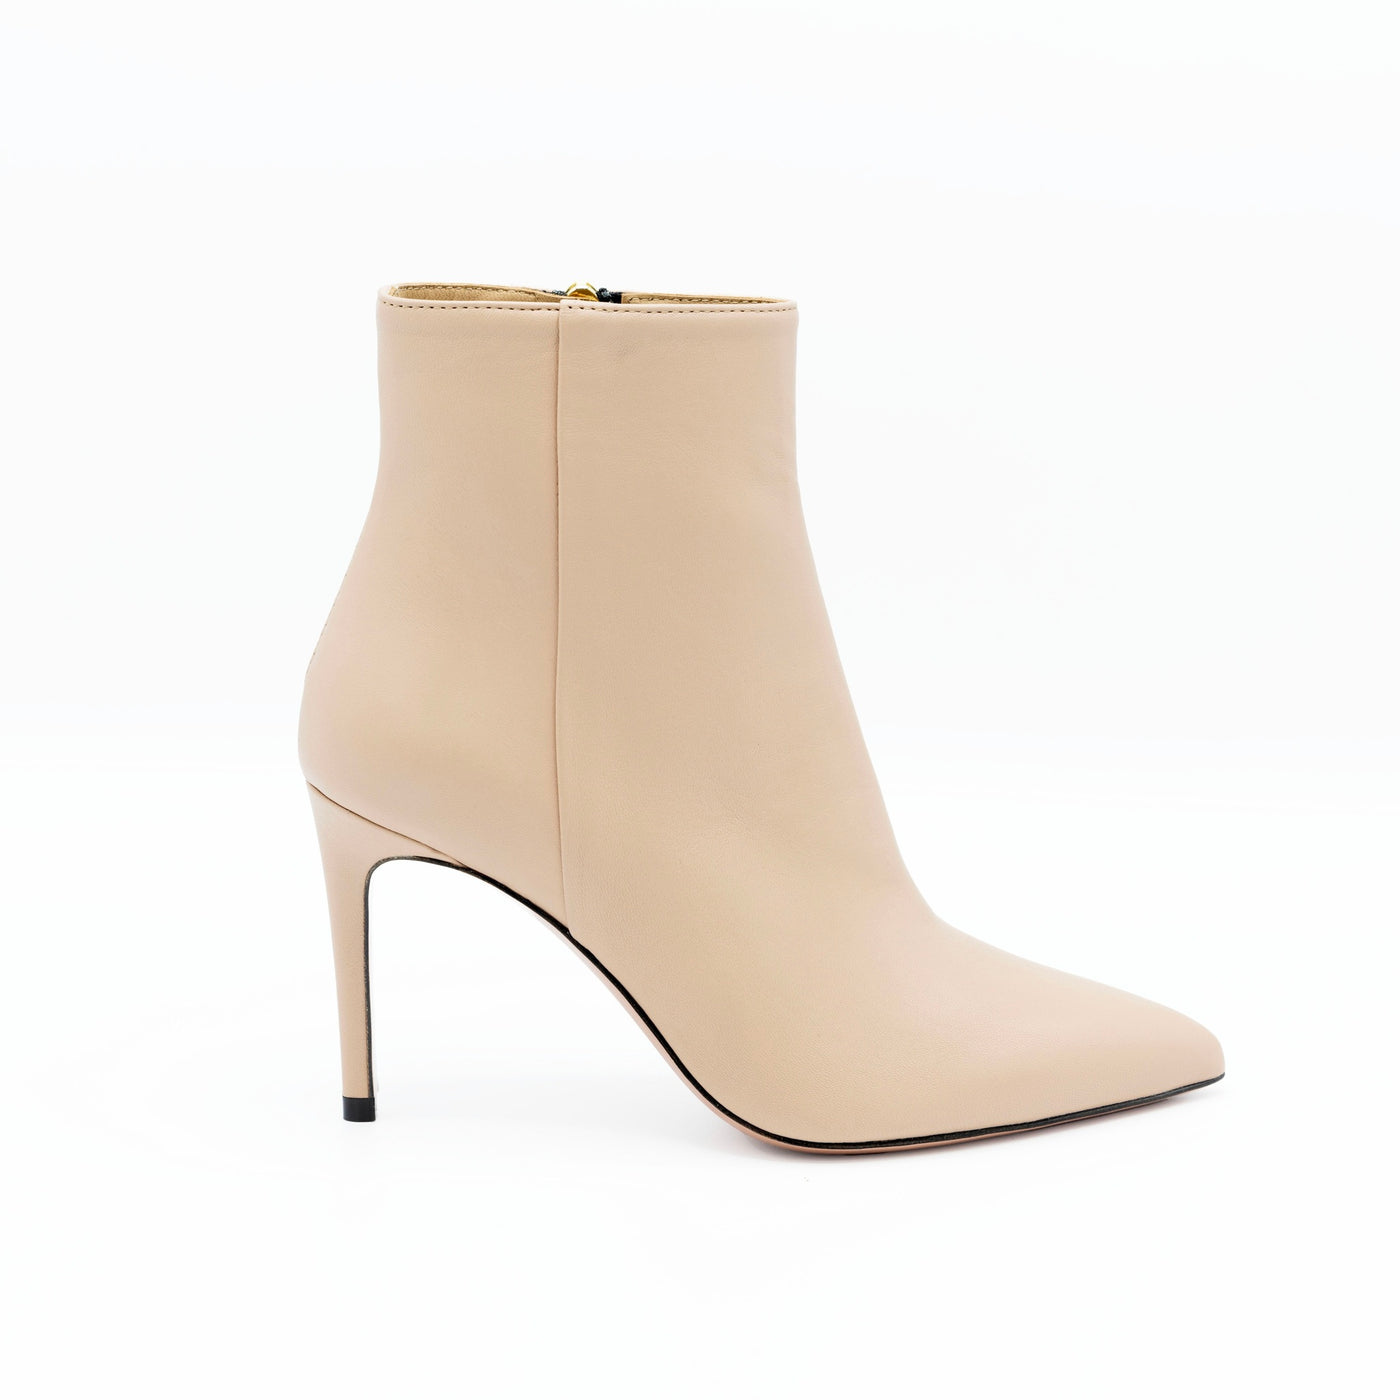 Beige leather stiletto ankle boots